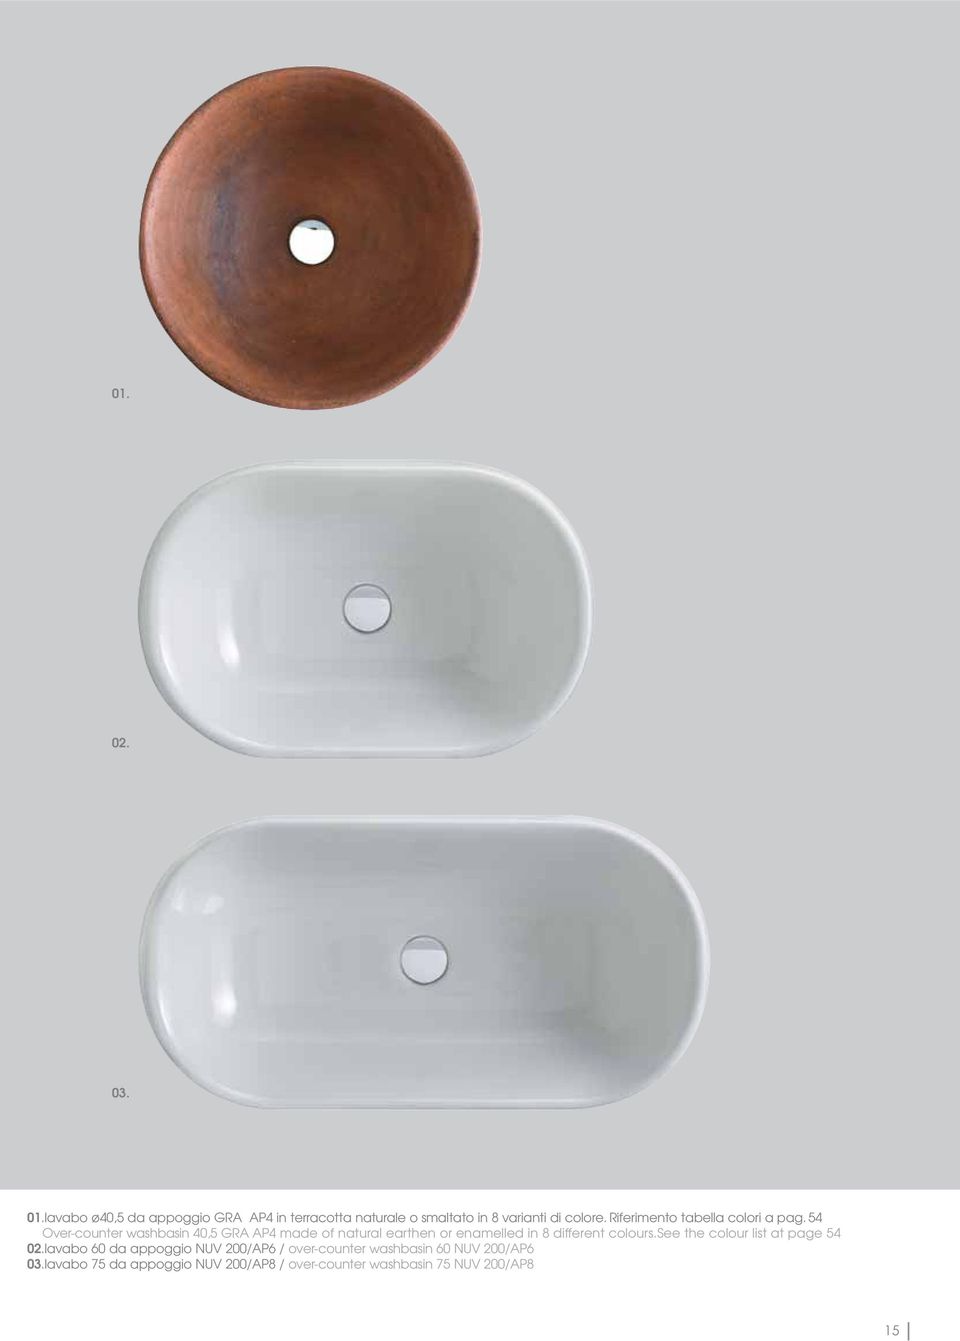 54 Over-counter washbasin 40,5 GRA AP4 made of natural earthen or enamelled in 8 different colours.